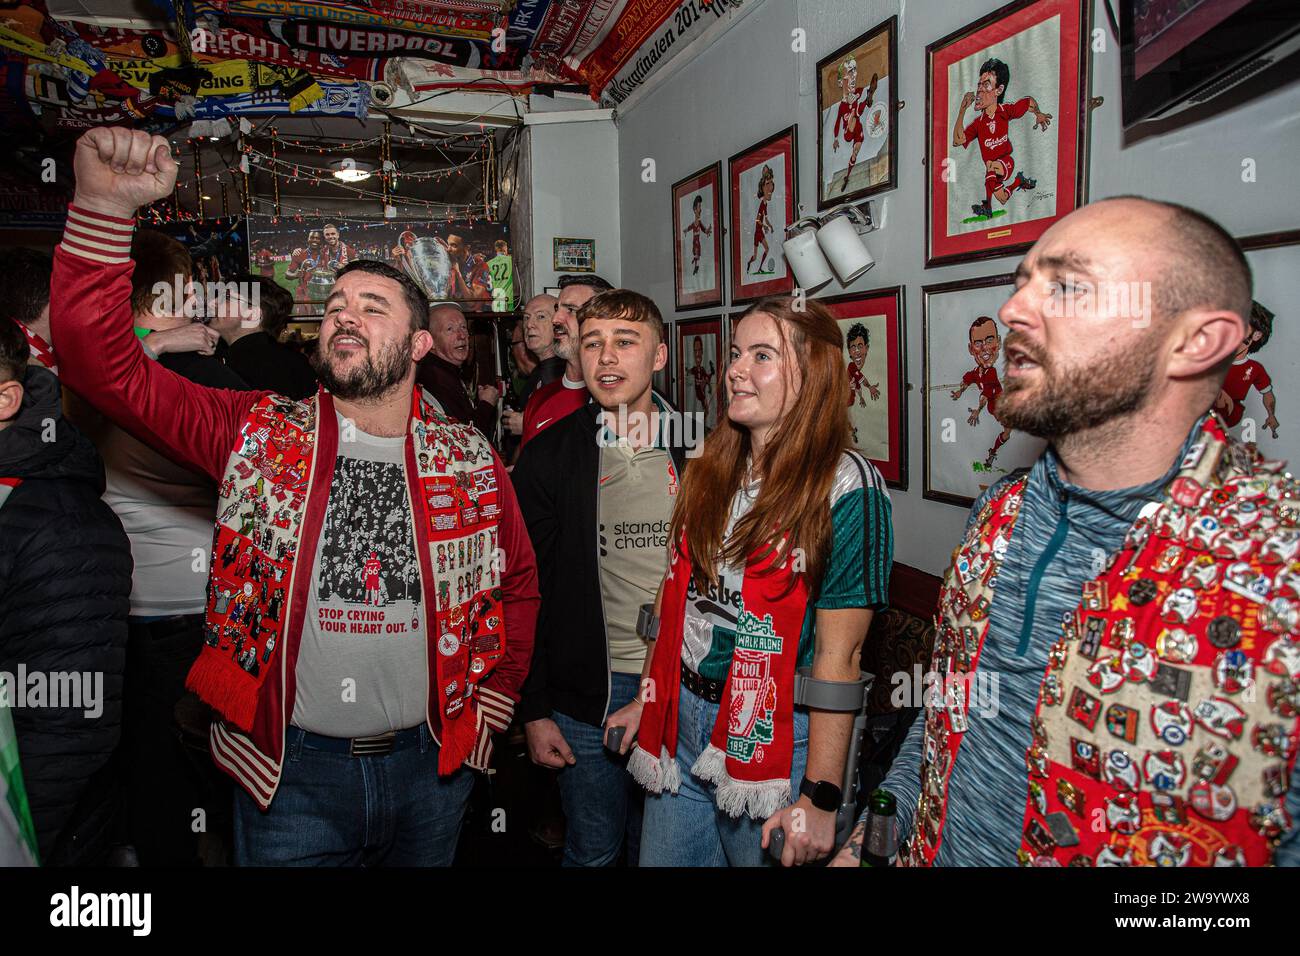 Liverpool fc supporters cheering  inside The Albert pub Anfield Liverpool England Stock Photo